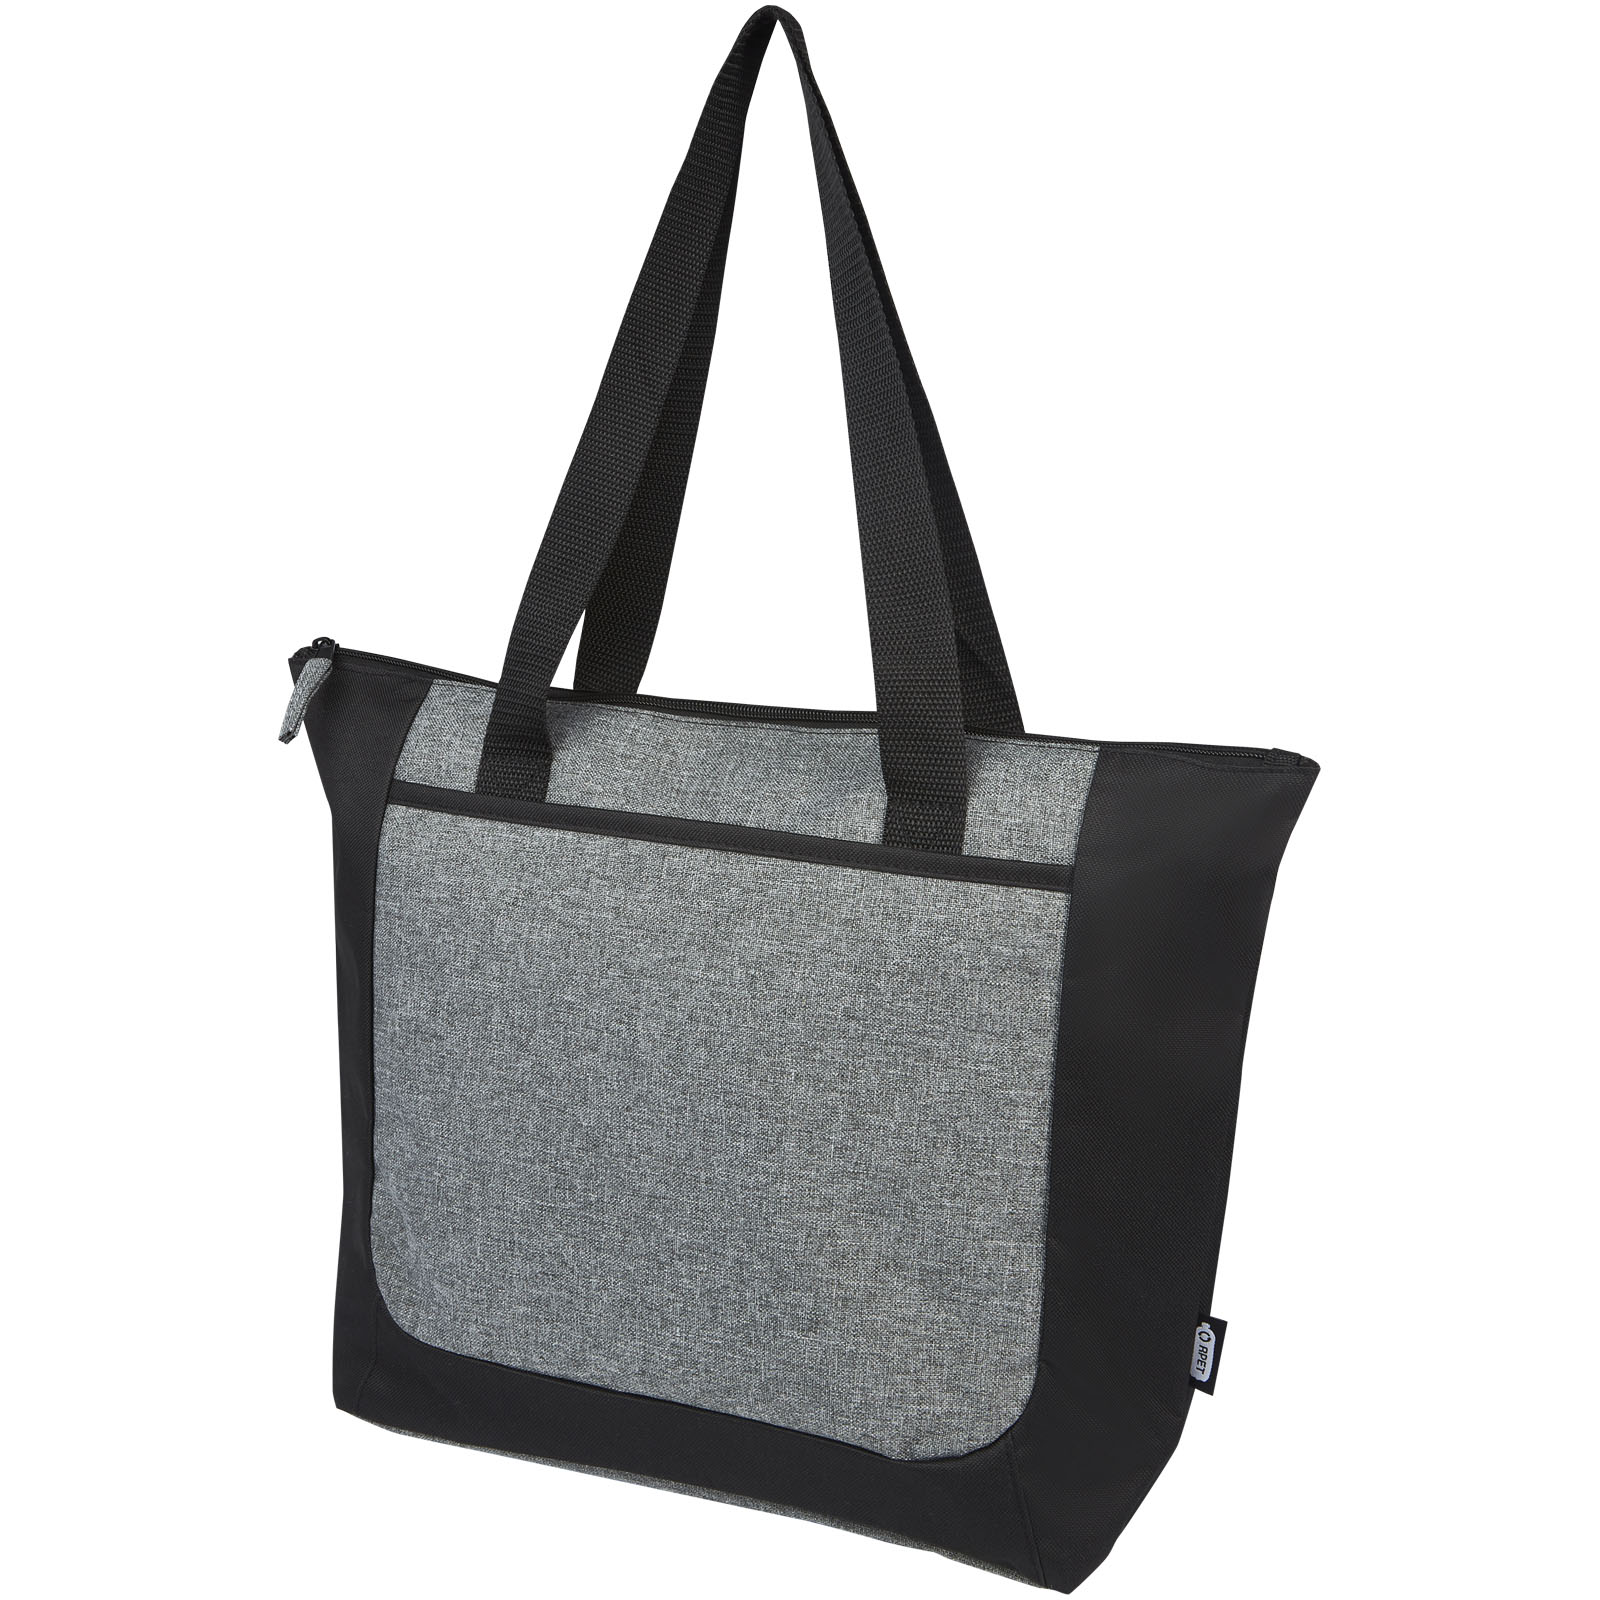 Shopping & Tote Bags - Reclaim GRS recycled two-tone zippered tote bag 15L